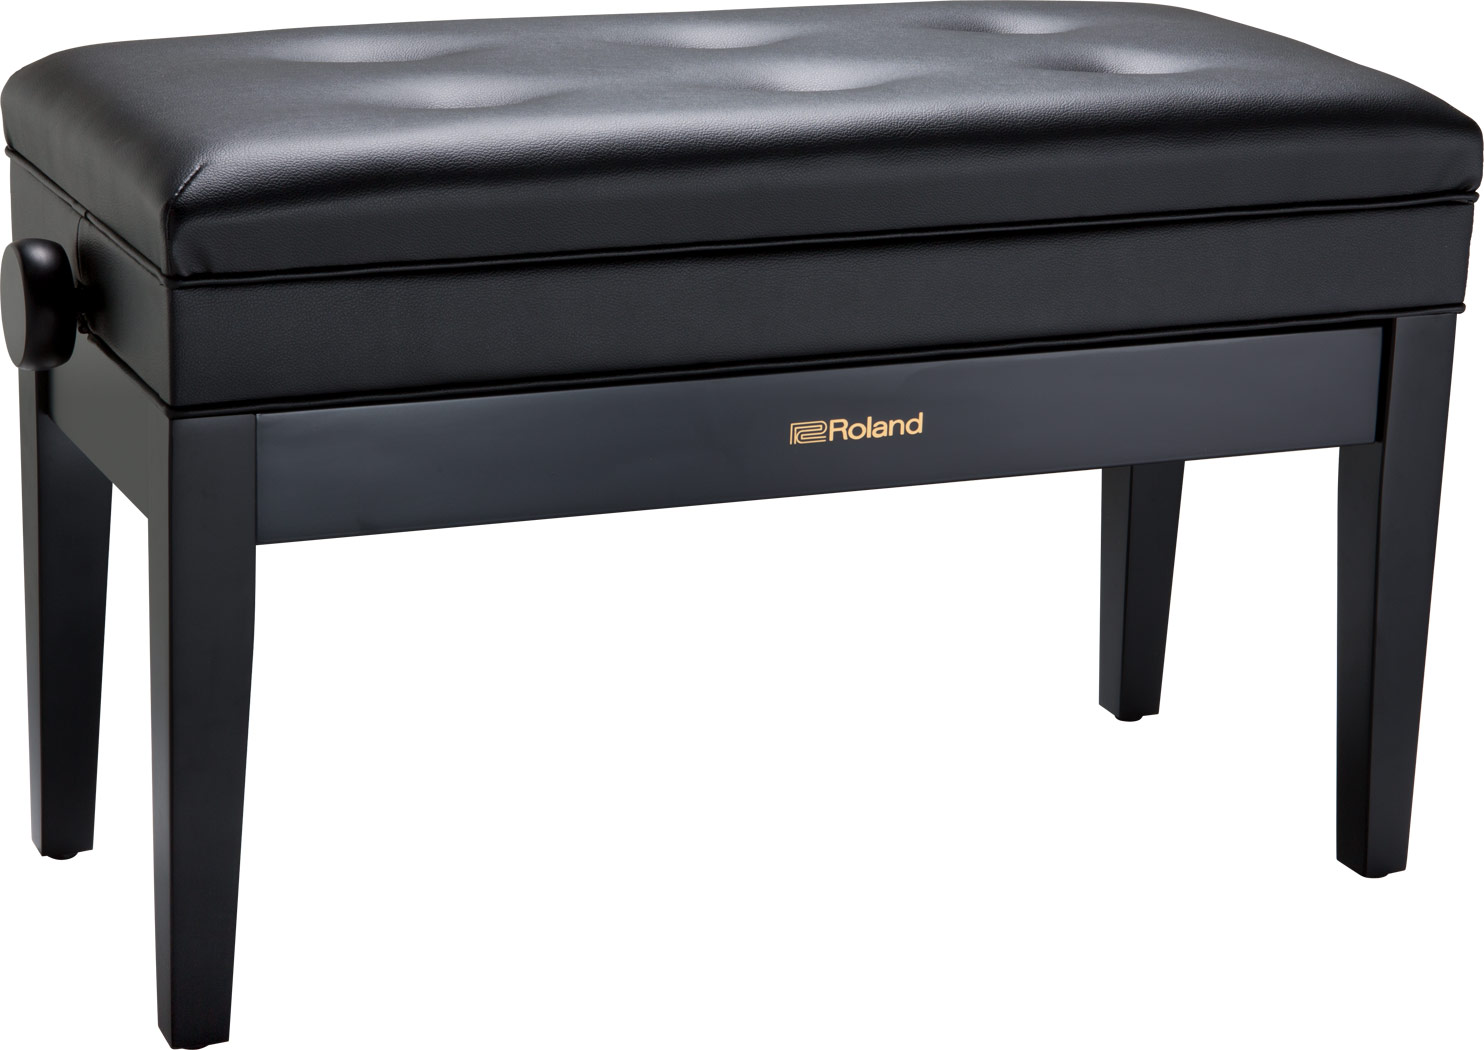 Roland duet piano bench with adjustable cushioned seat and storage compartment - RPB-D400BK